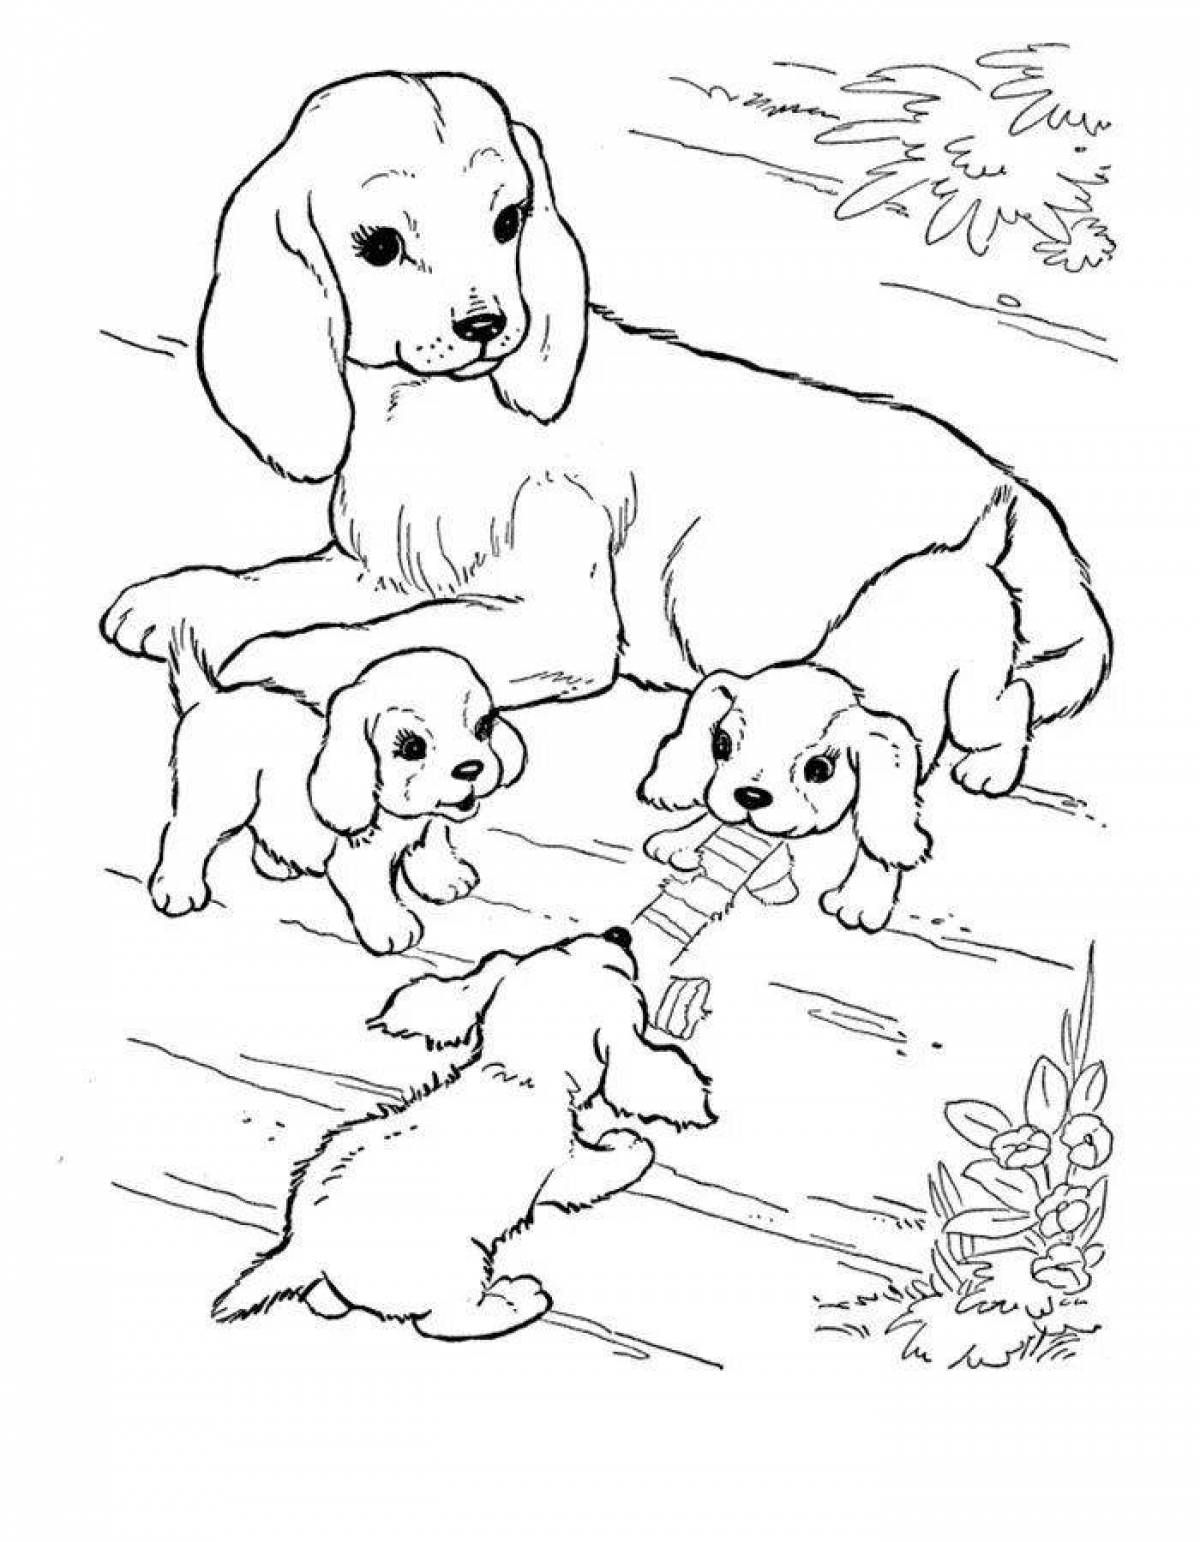 Coloring pages of pets